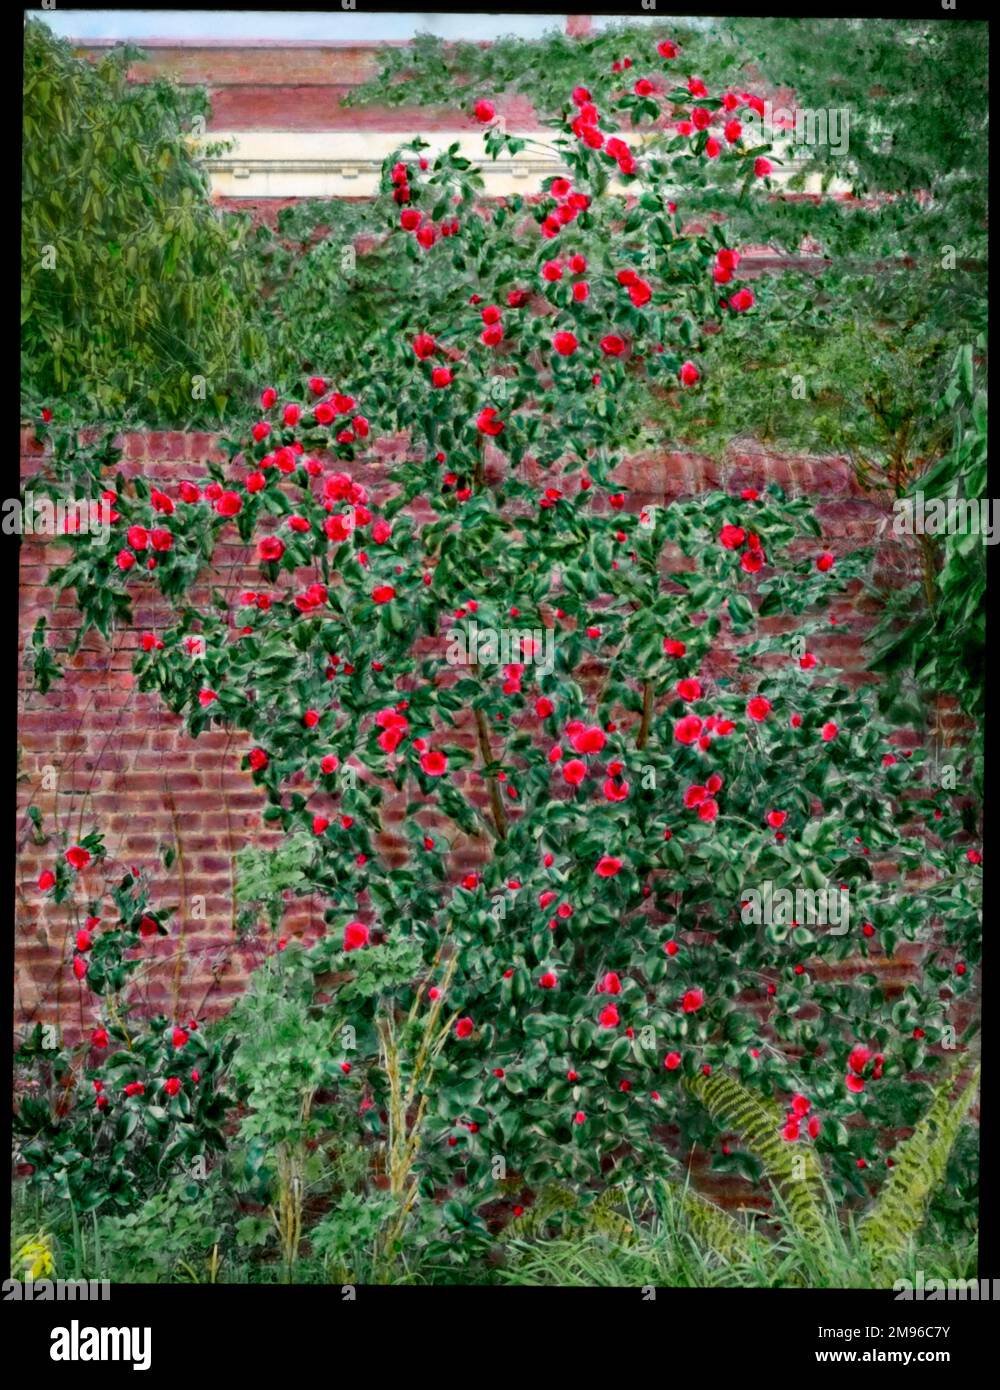 A Camellia (Camellias) bush, a flowering plant of the Theaceae family, with bright red flowers, growing by a garden wall. Stock Photo